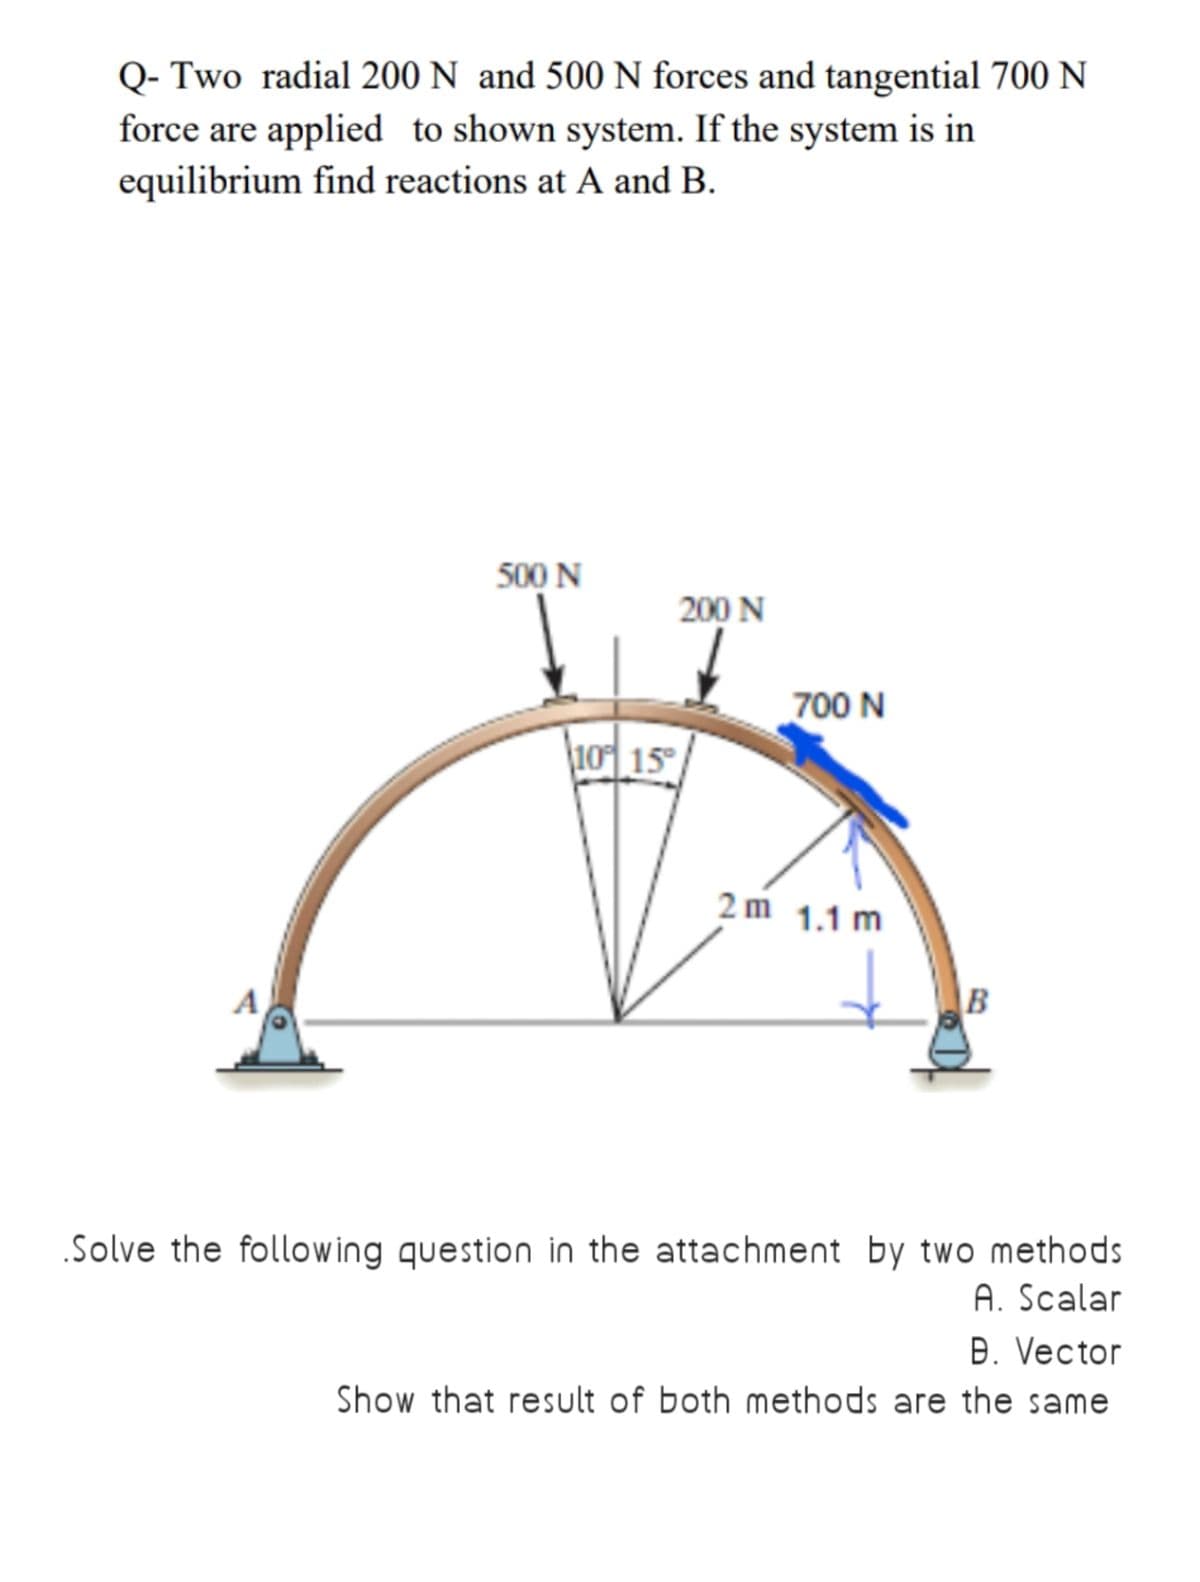 Q- Two radial 200 N and 500 N forces and tangential 700 N
force are applied to shown system. If the system is in
equilibrium find reactions at A and B.
500 N
200 N
700 N
10 15
2 m
1.1 m
A
B
Solve the following question in the attachment by two methods
A. Scalar
B. Vector
Show that result of both methods are the same
